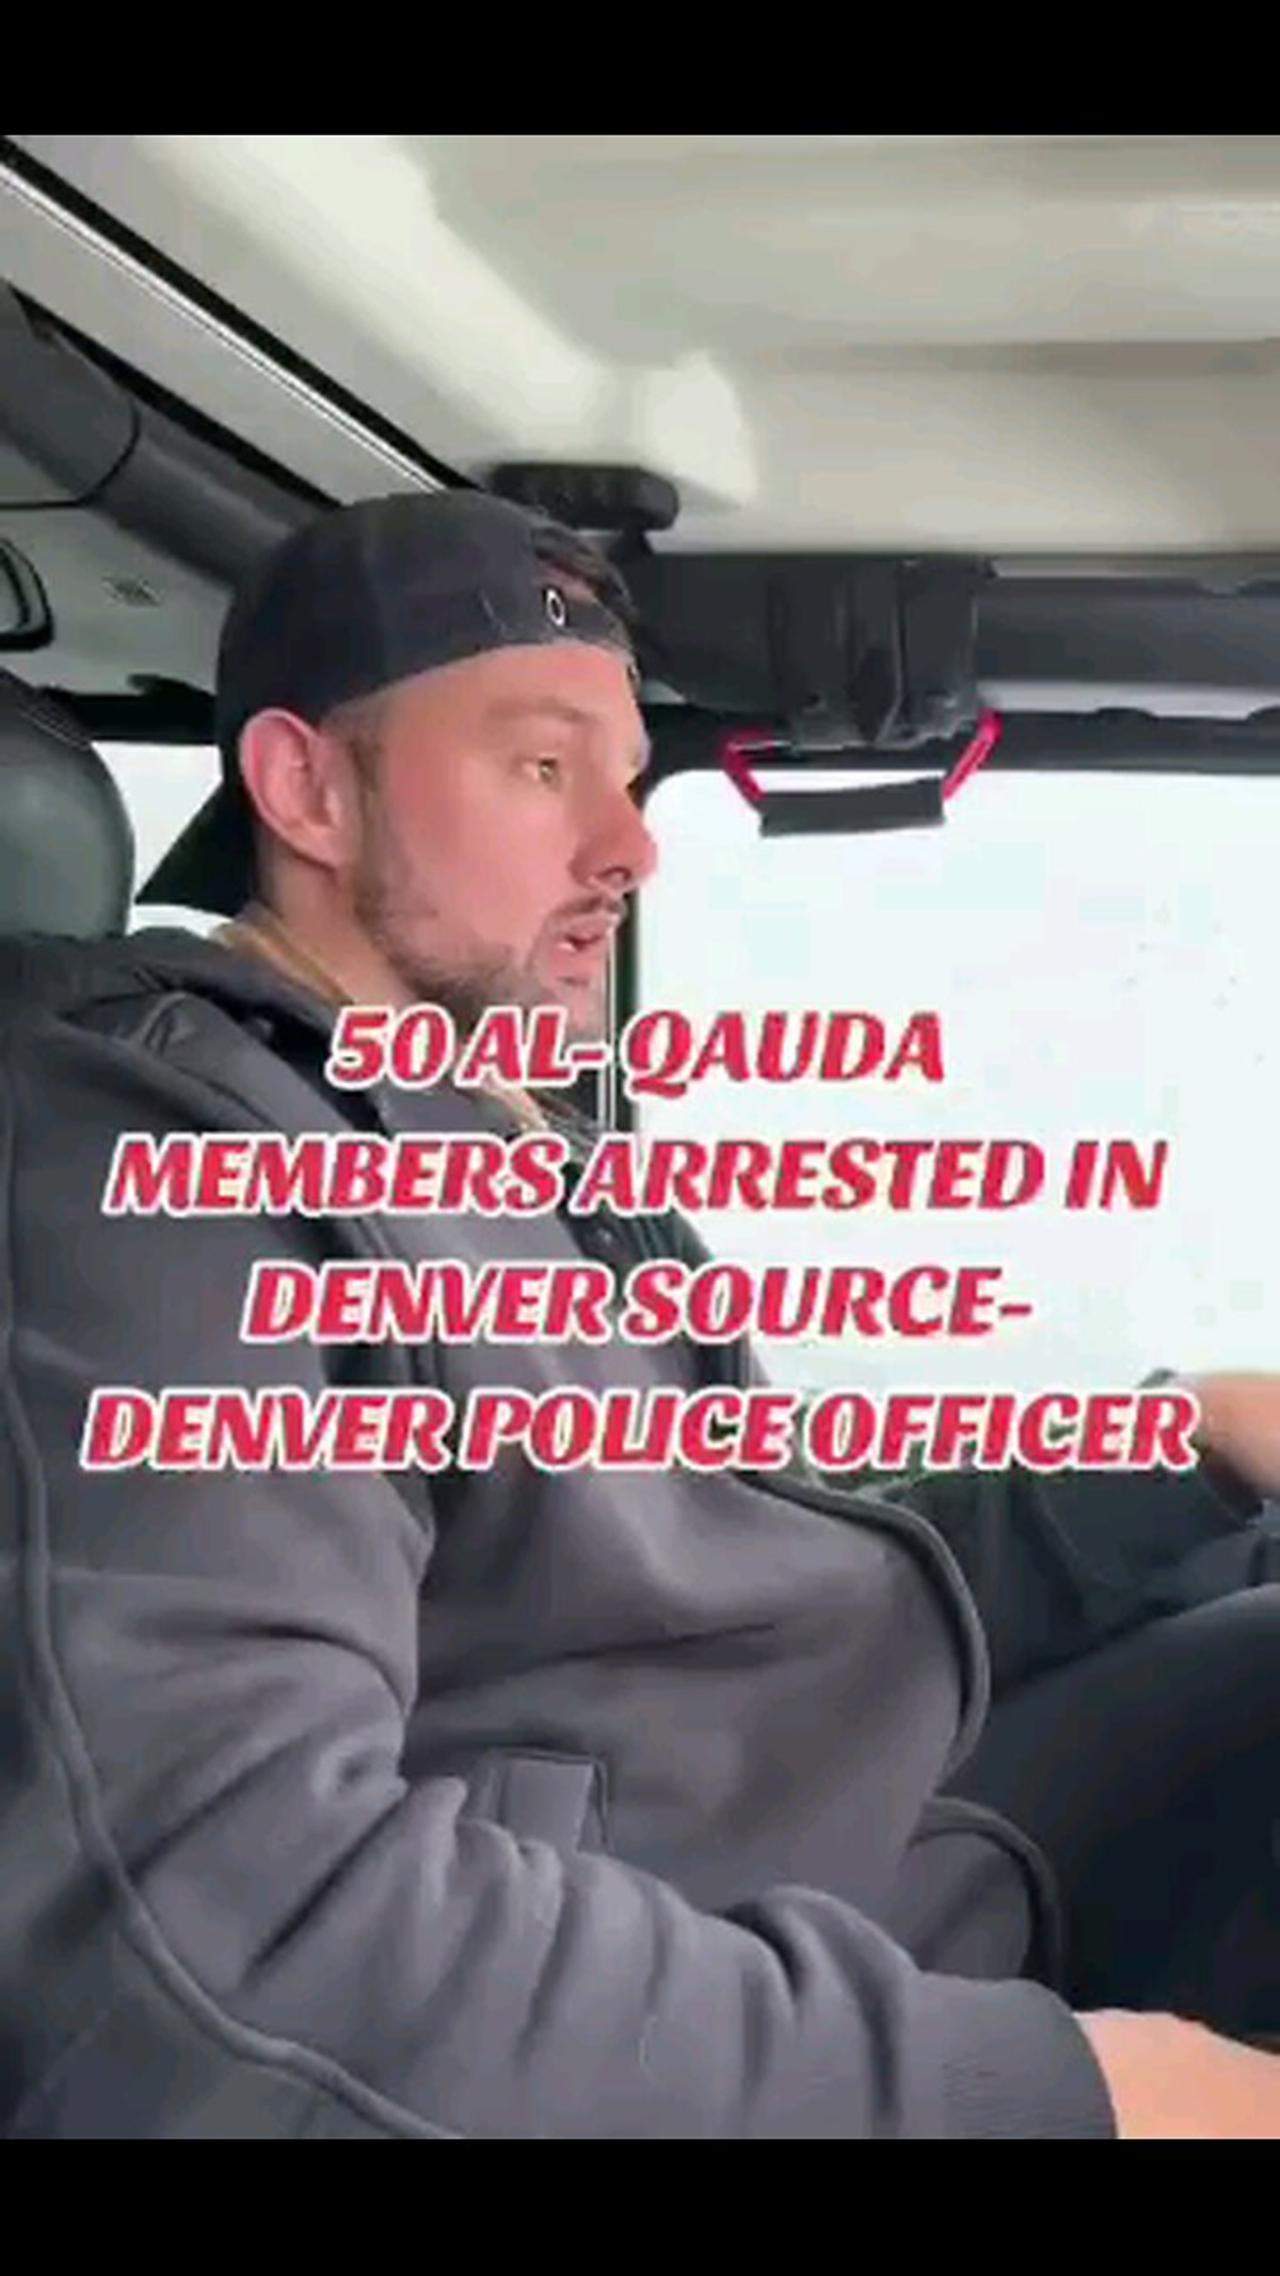 50 Al Qaeda Members have been arrested in Denver over the last couple months.